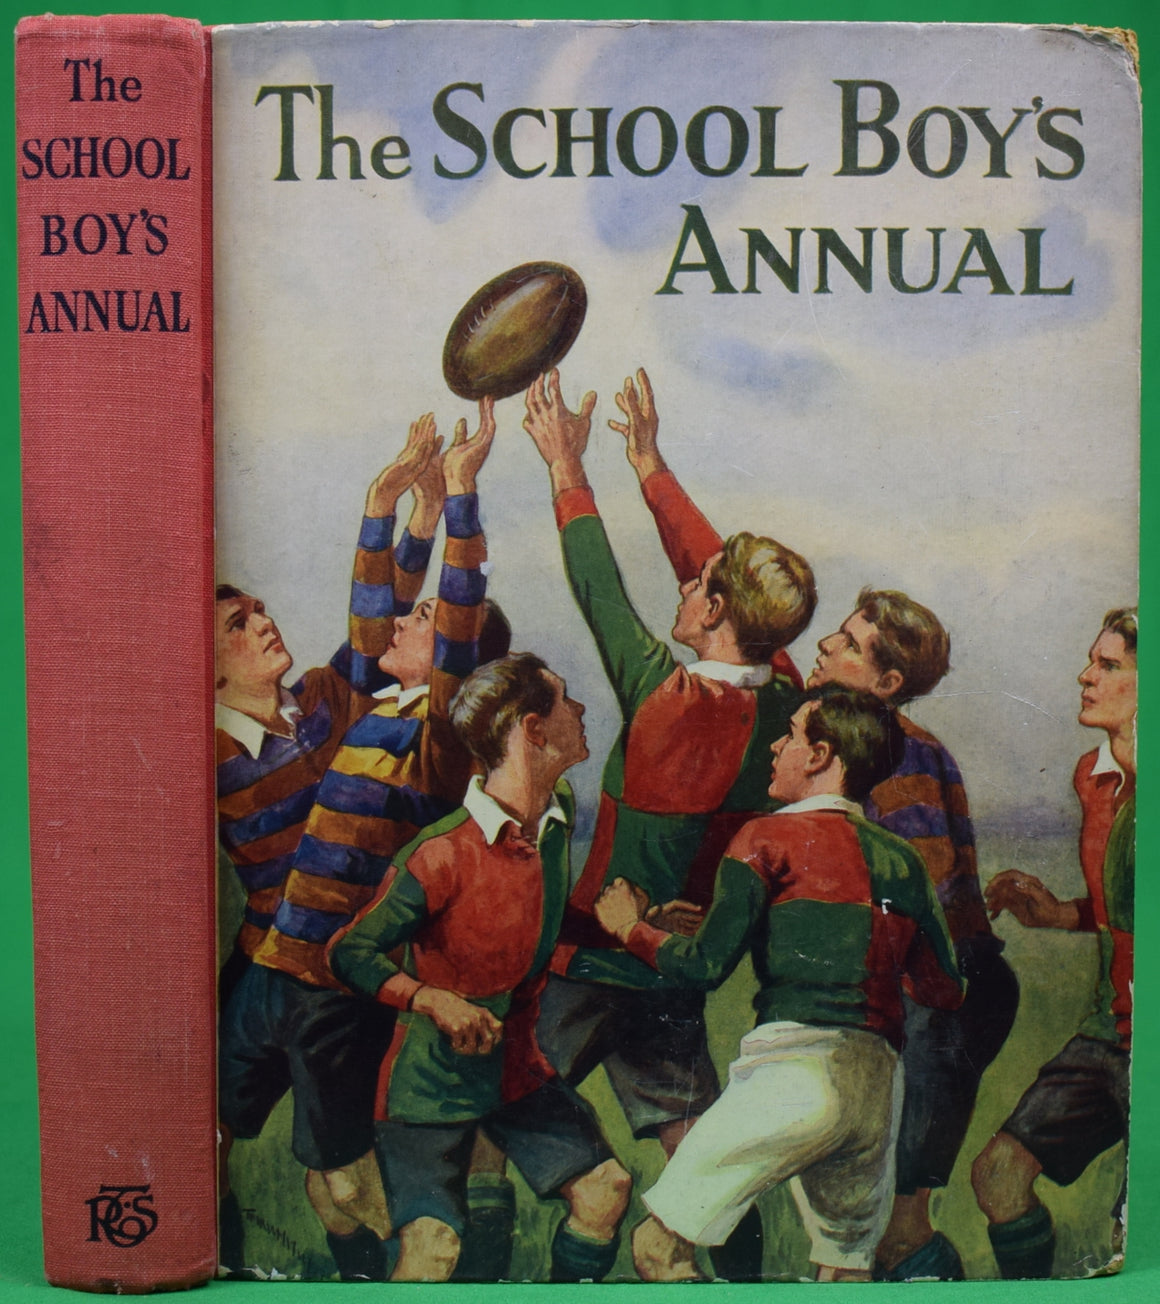 "The School Boy's Annual Tales Of School Life Sport And Adventure"